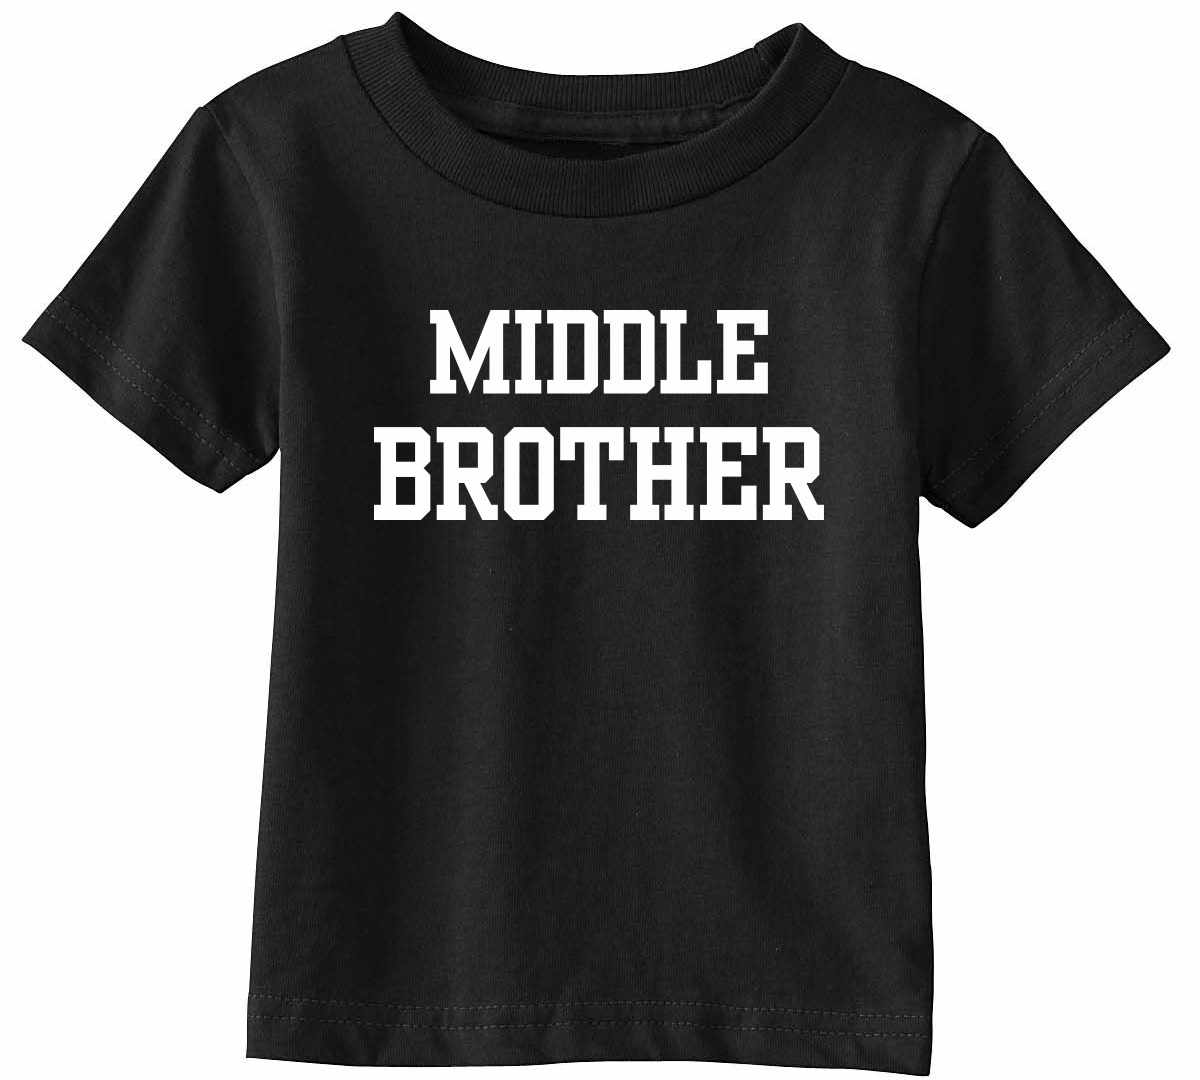 MIDDLE BROTHER Infant/Toddler  (#1112-7)